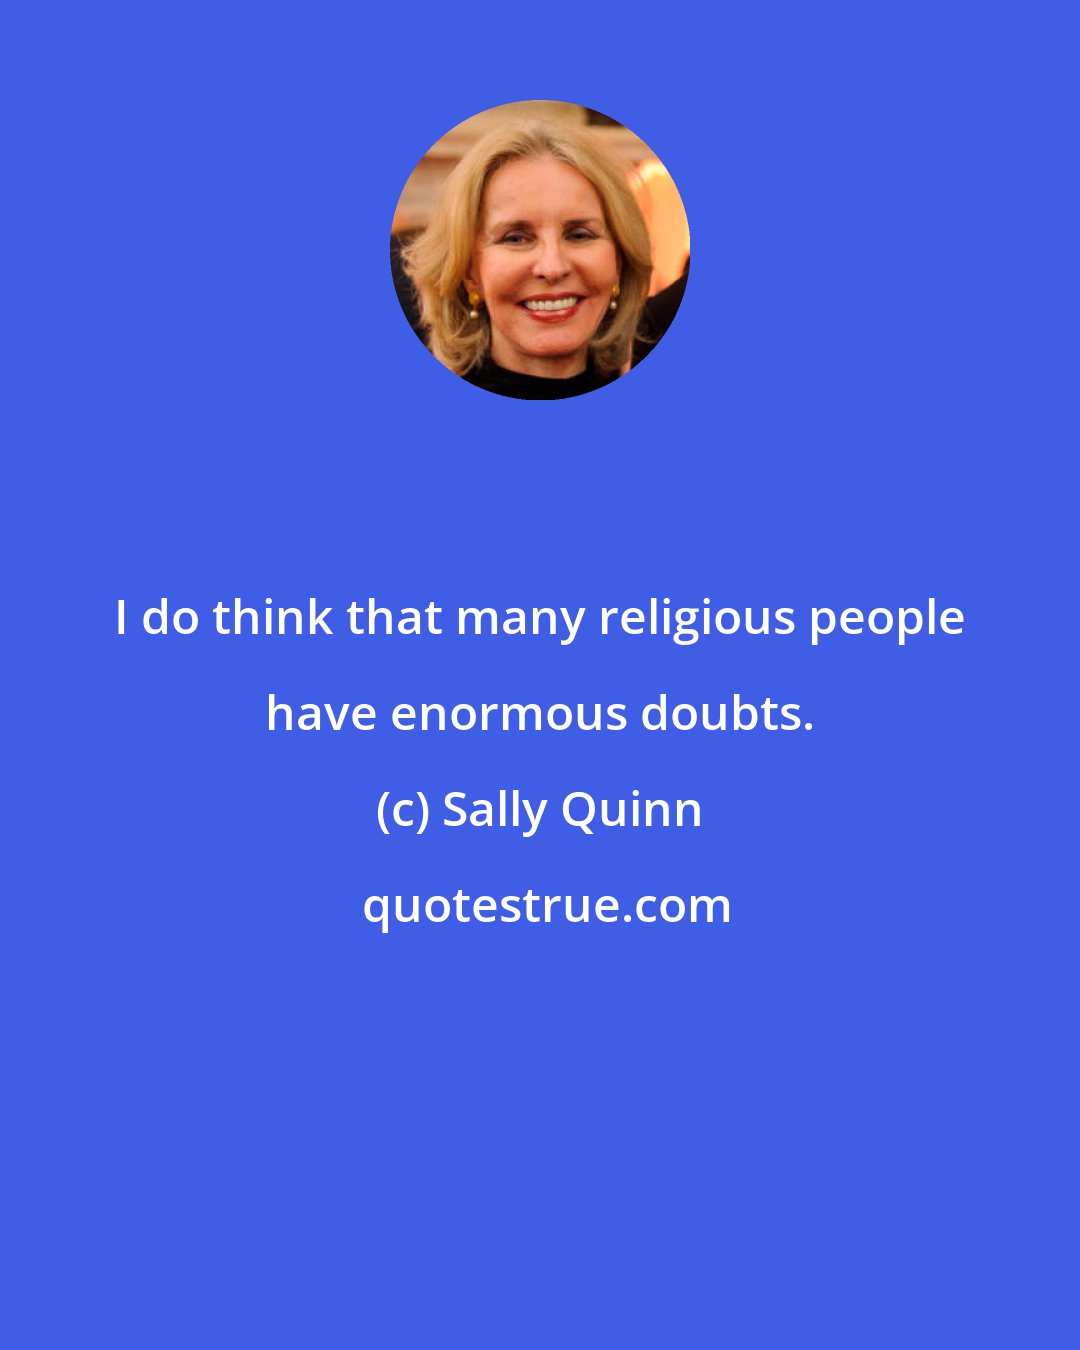 Sally Quinn: I do think that many religious people have enormous doubts.